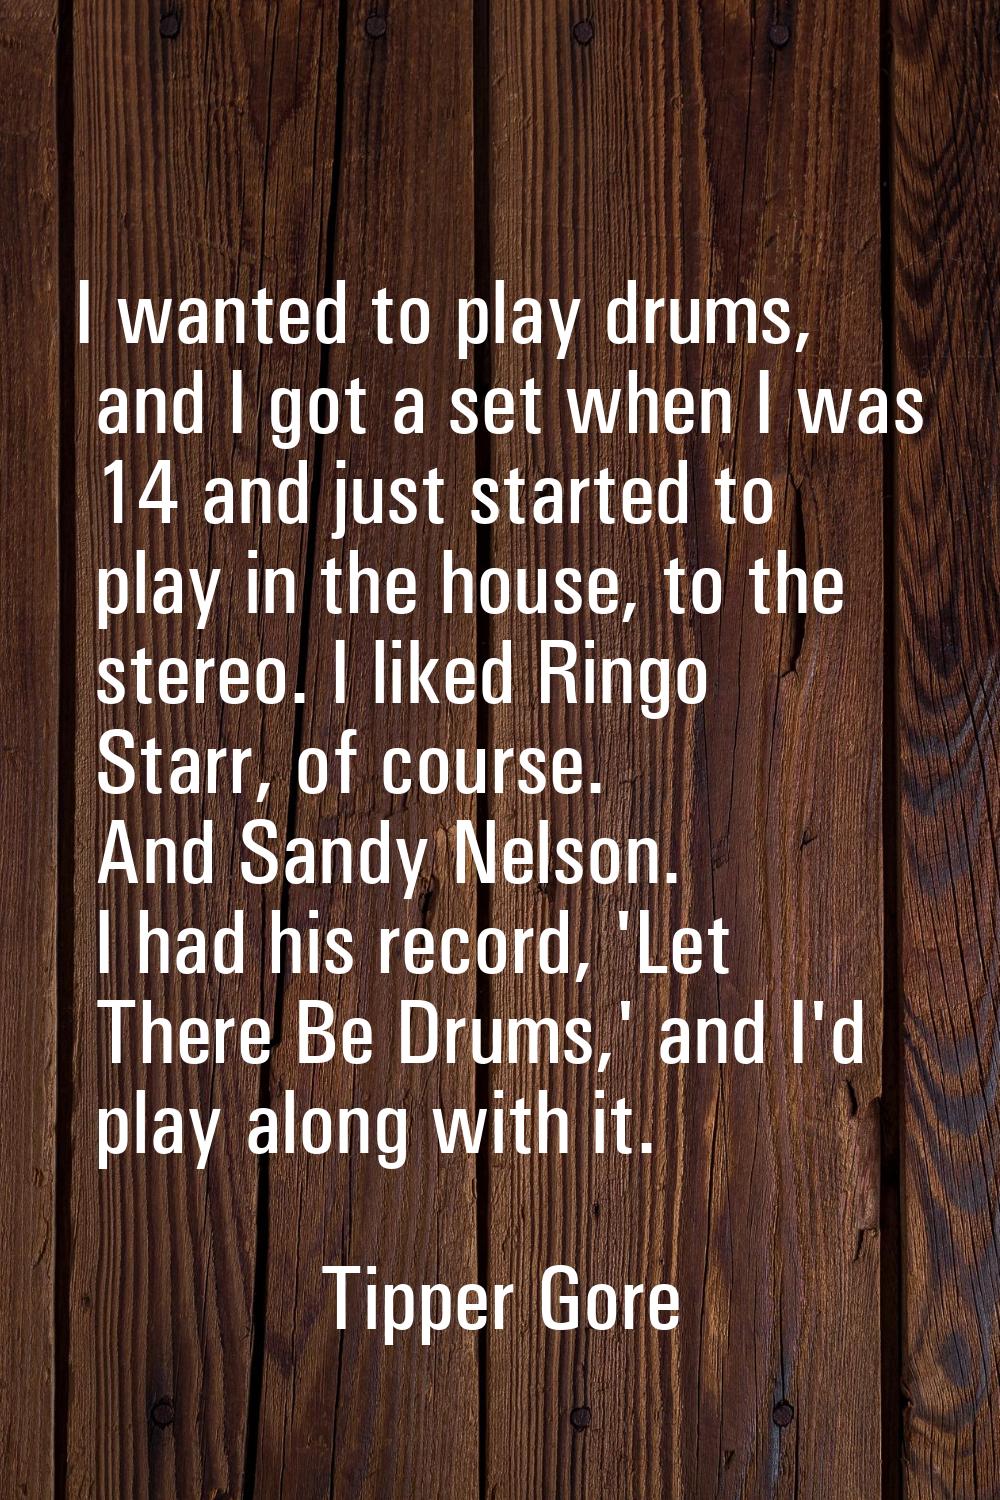 I wanted to play drums, and I got a set when I was 14 and just started to play in the house, to the